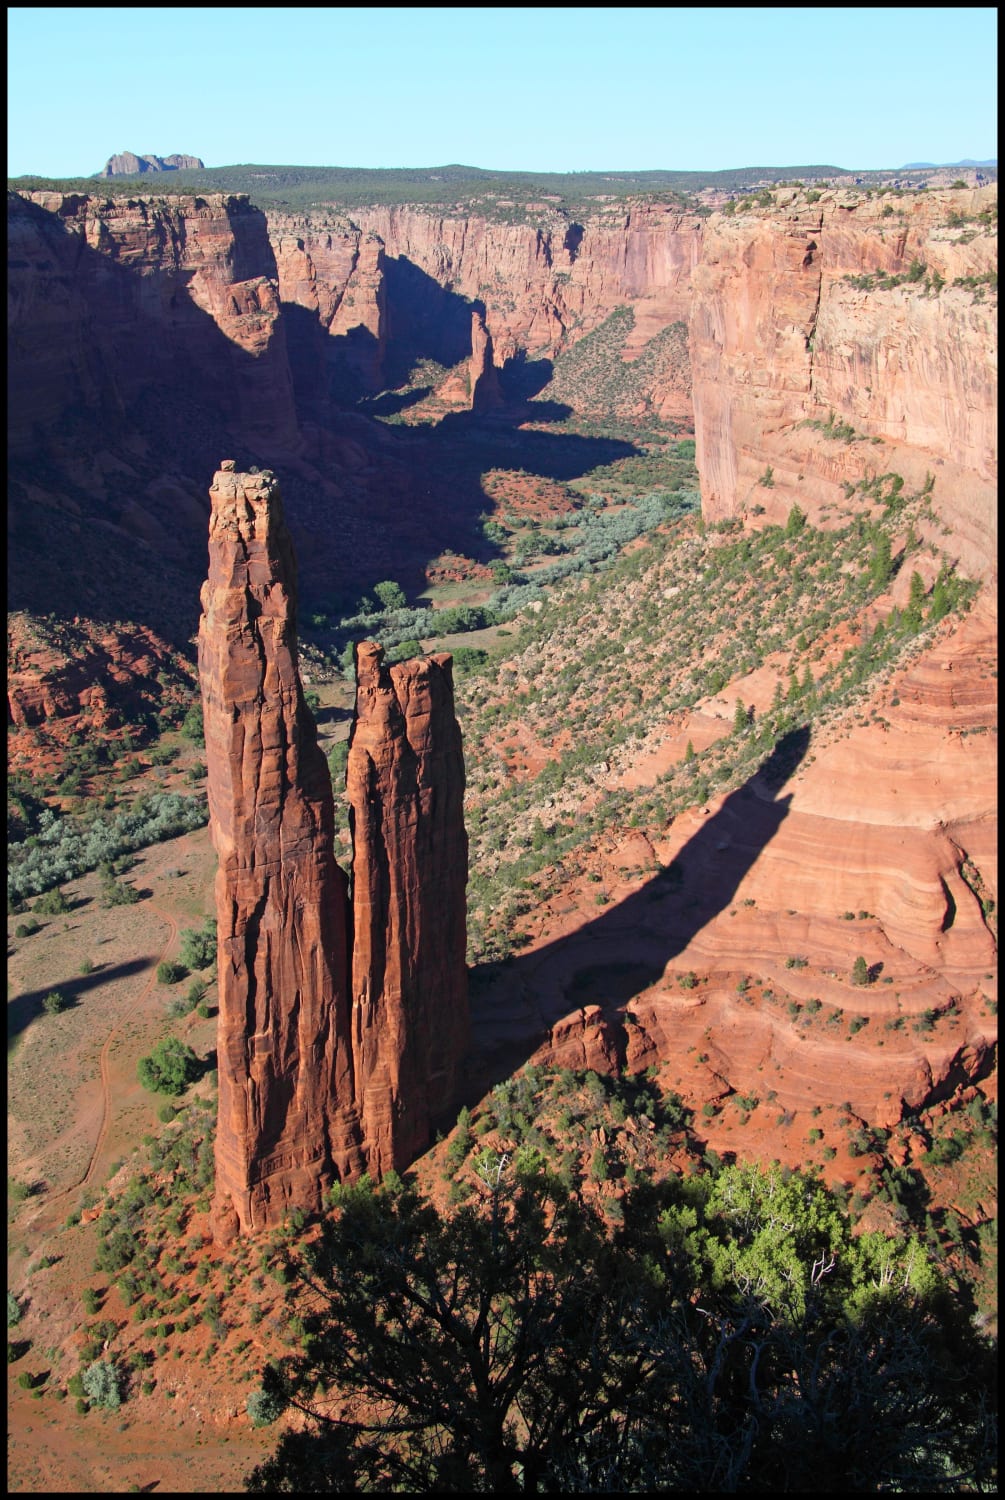 Spider Rock located at Canyon de Chelly, Arizona